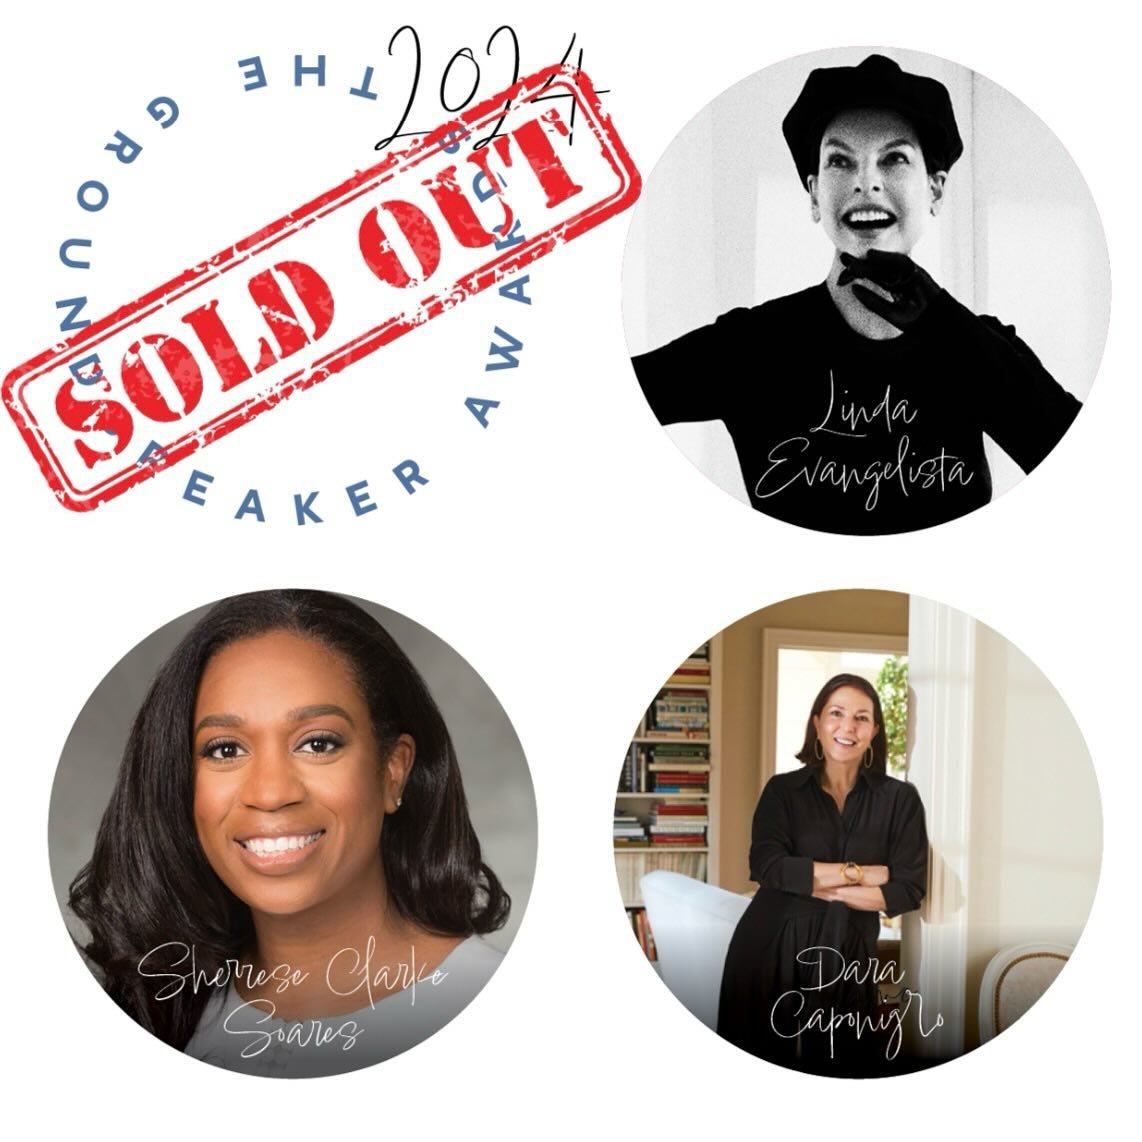 Looking forward to our Ground Breaker Awards Dinner on Wednesday 4/24! With esteemed honorees @dara_caponigro, @lindaevangelista, and @sherreseclarkesoares ✨

Thank you for all your support, the dinner is sold out and will be a great success! 

#Lead